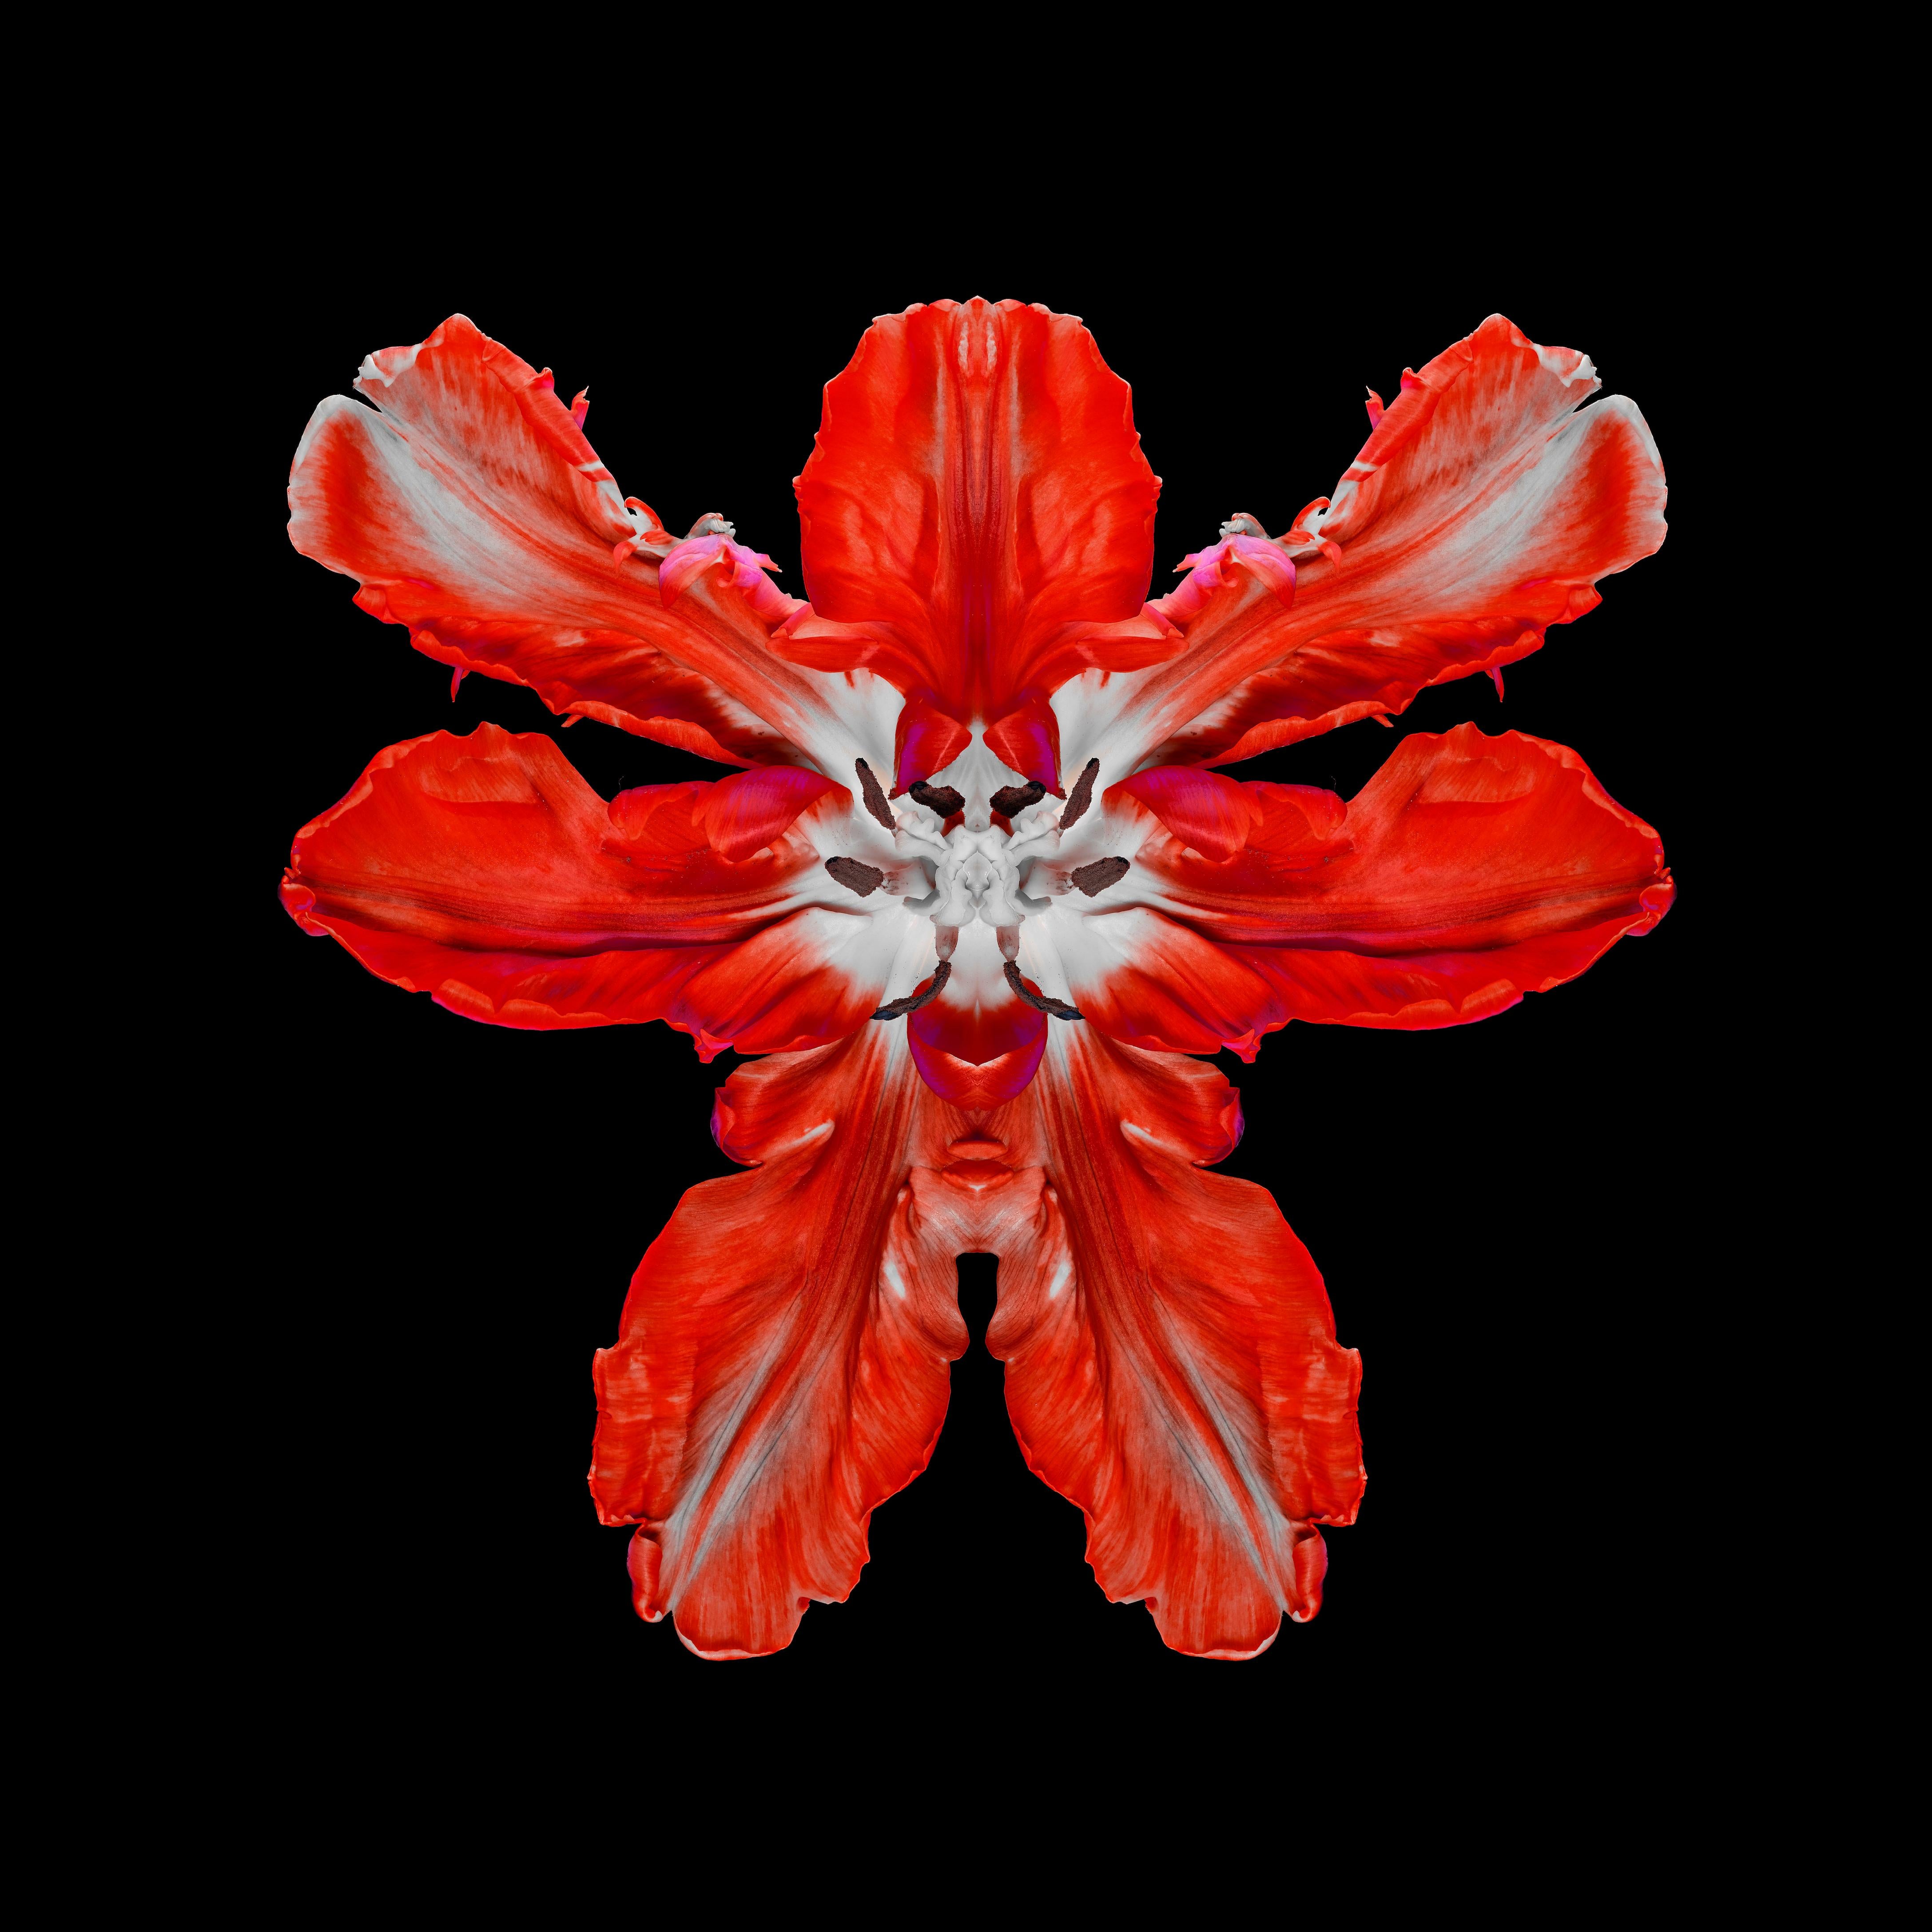 Jeff Robb Color Photograph - "Embryonic Tulip 1" 3-D motion Lenticular red flower photo framed, contemporary